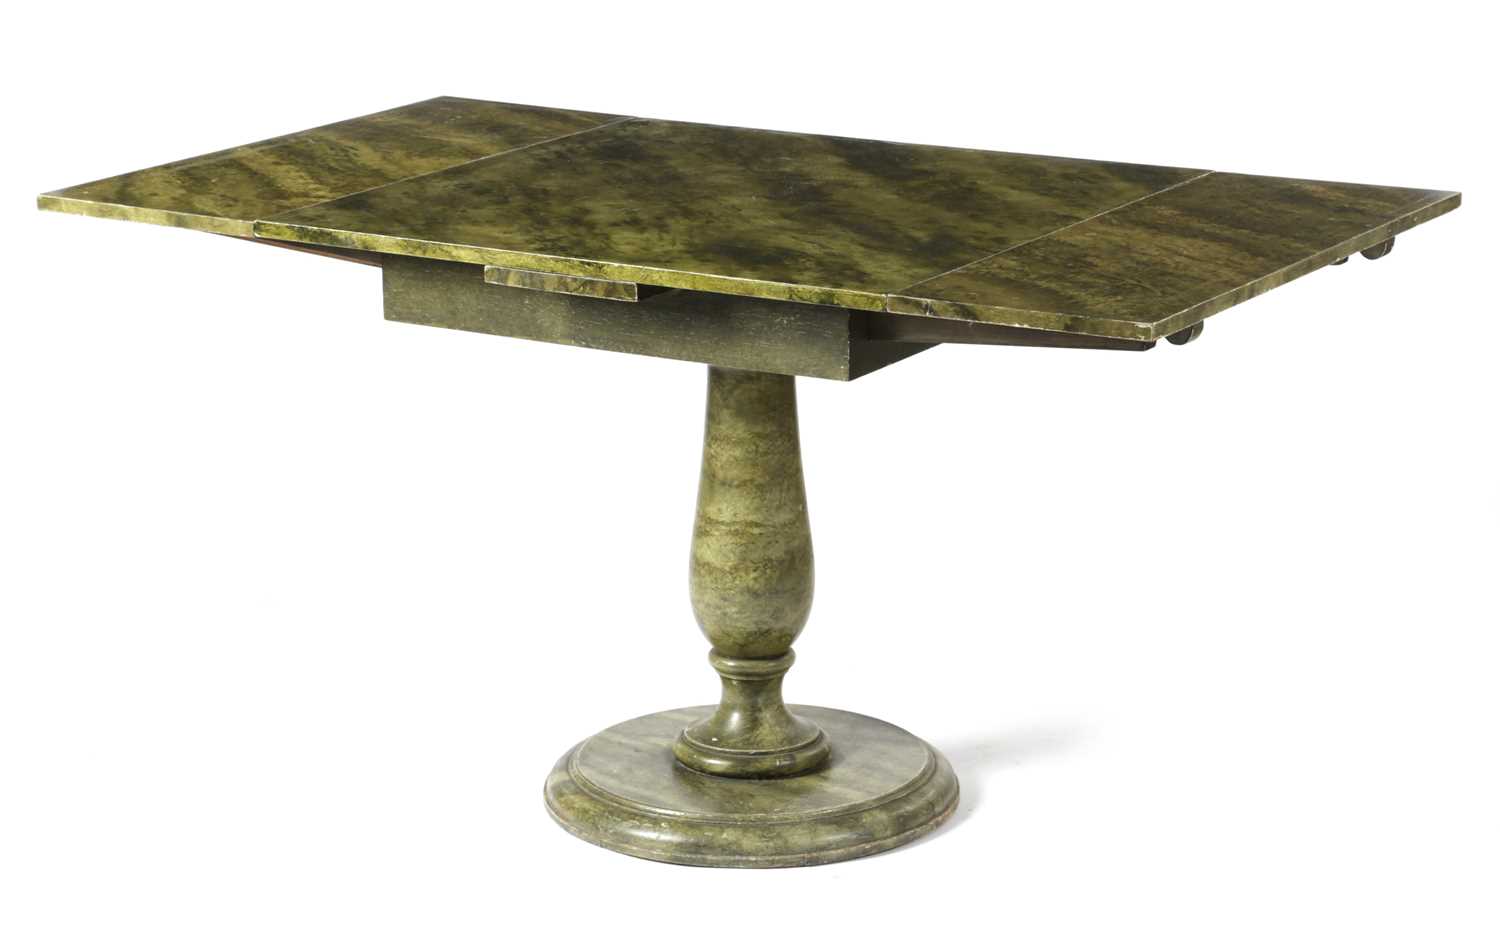 A RARE GREEN PAINTED FAUX MARBLE DRAW-LEAF DINING TABLE ATTRIBUTED TO JOHN FOWLER, C.1950-60 the - Image 3 of 3